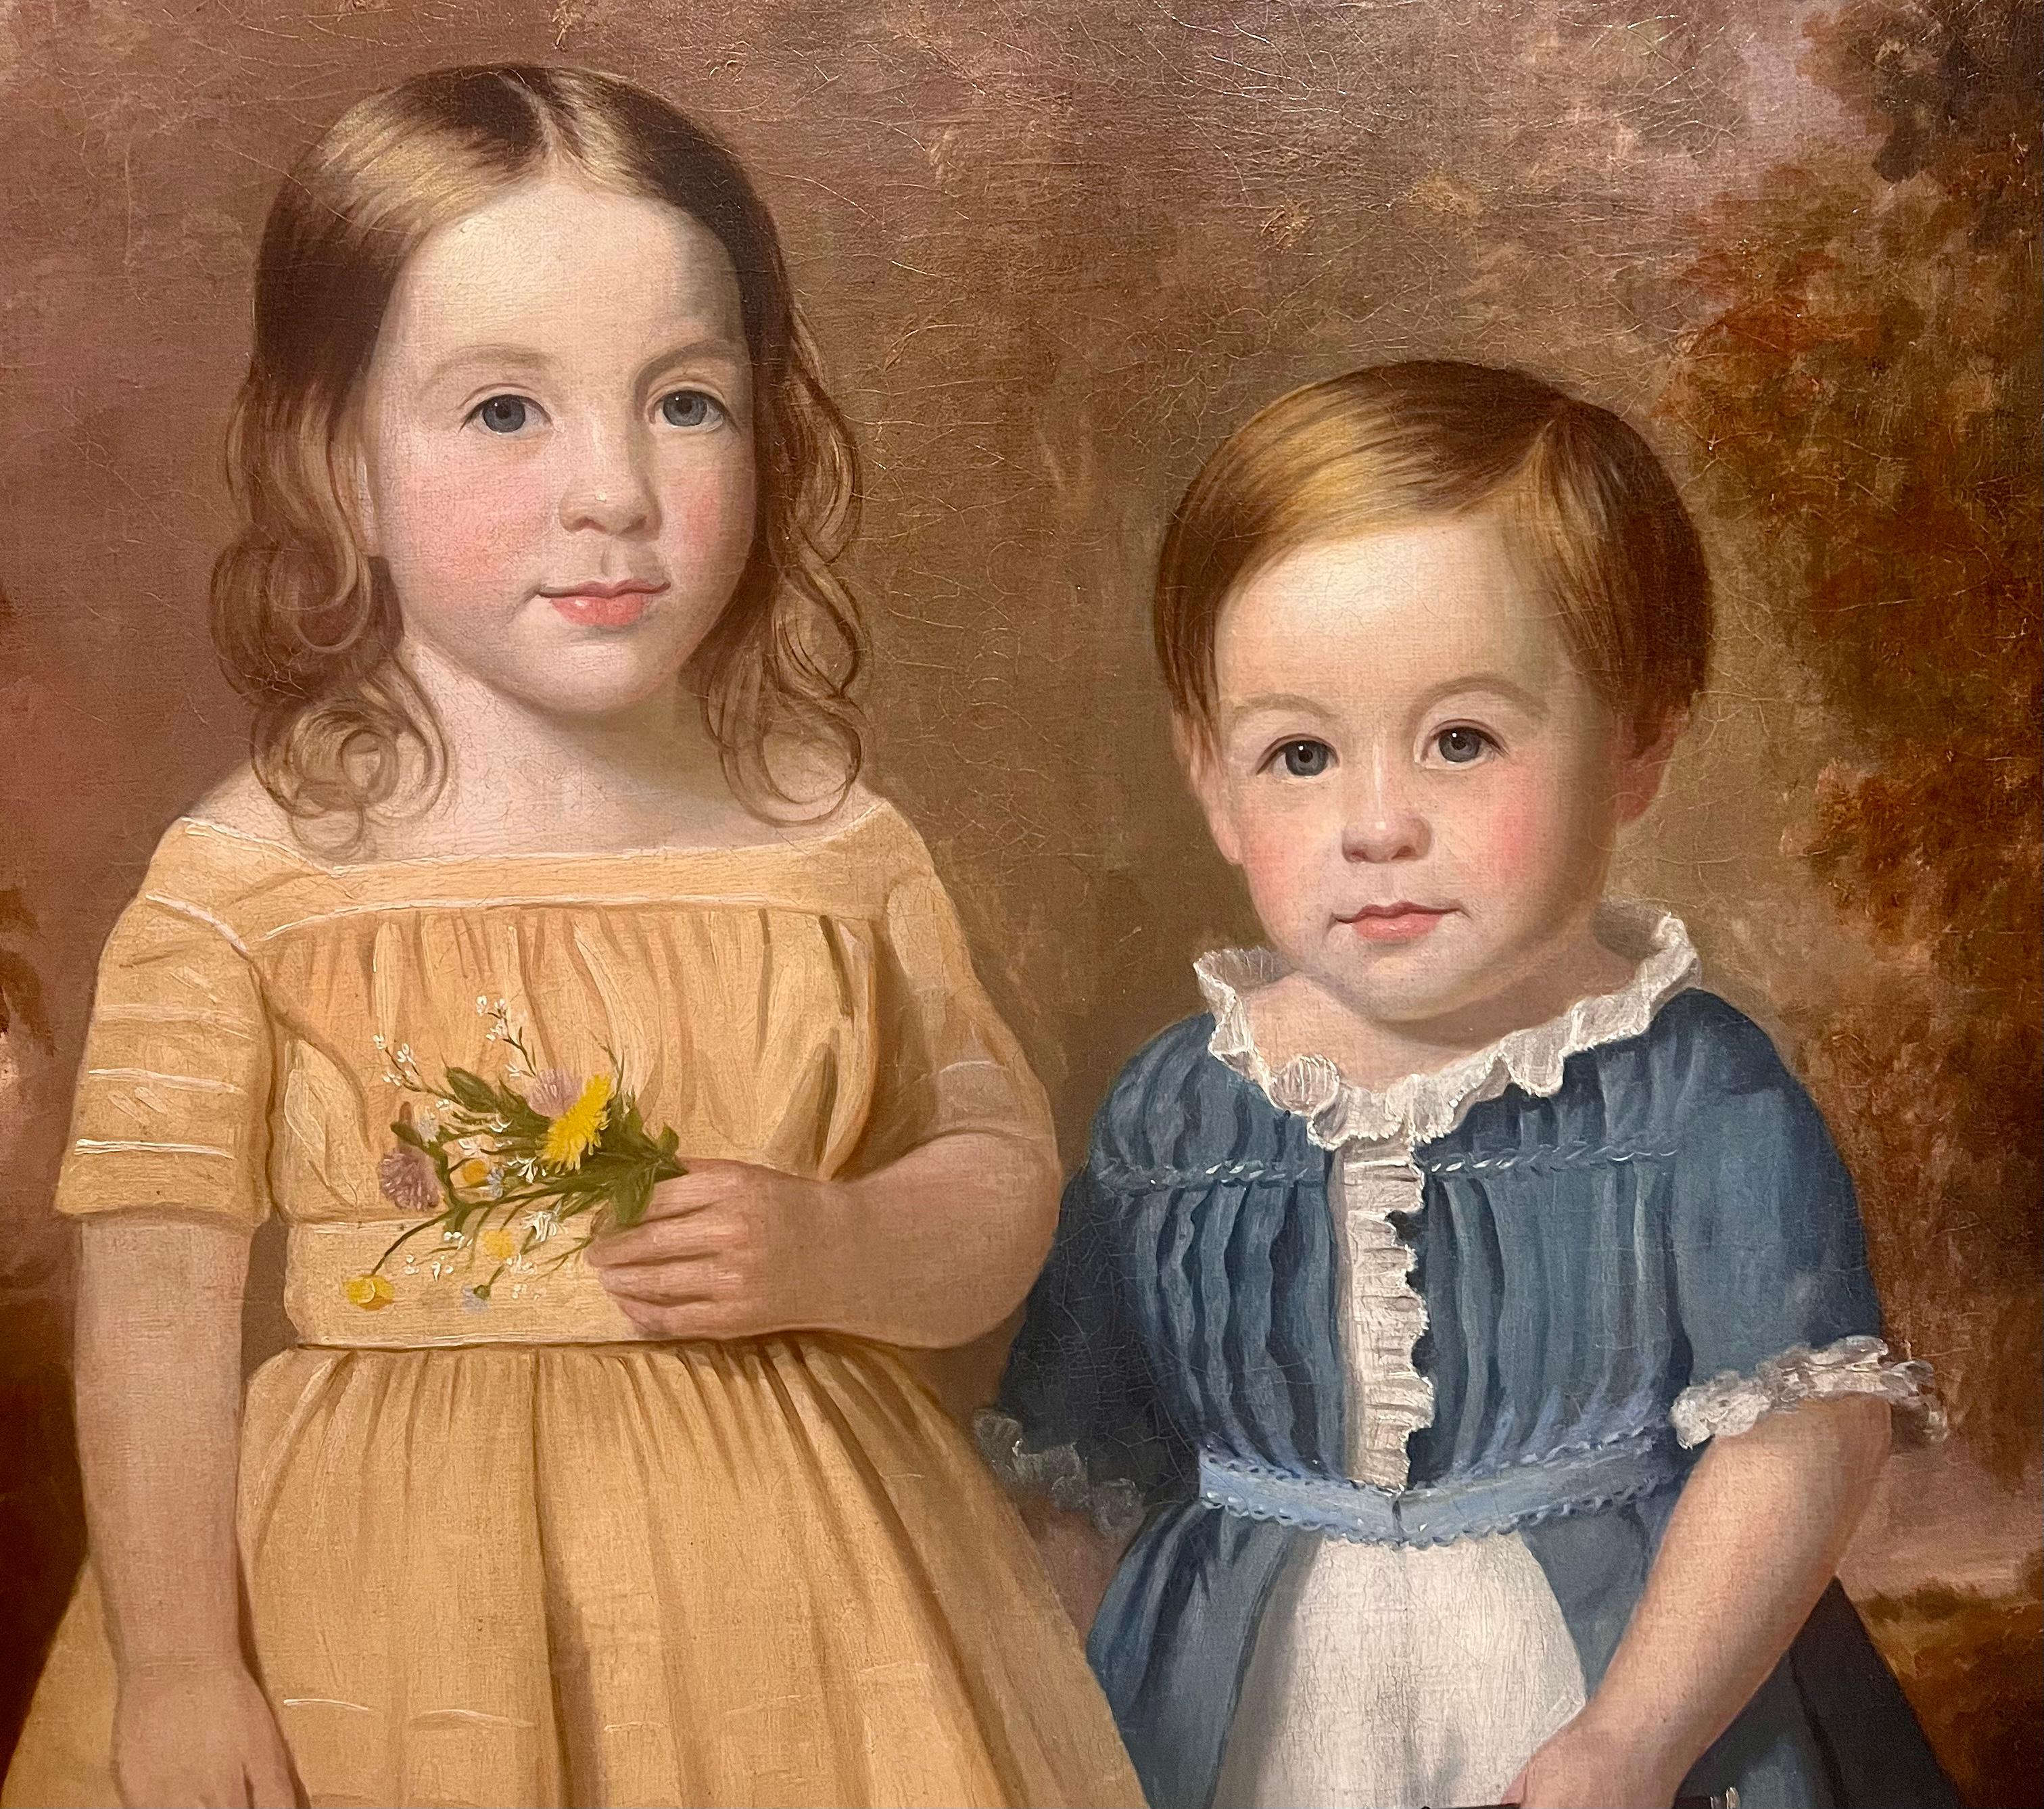 Probably one of the most amazing detailed American 19th century folk art paintings I have ever owned!!! I have attached a picture of my 3 year old next to it, so you can see how beautiful the painting is

Life size siblings, most likely a prominent